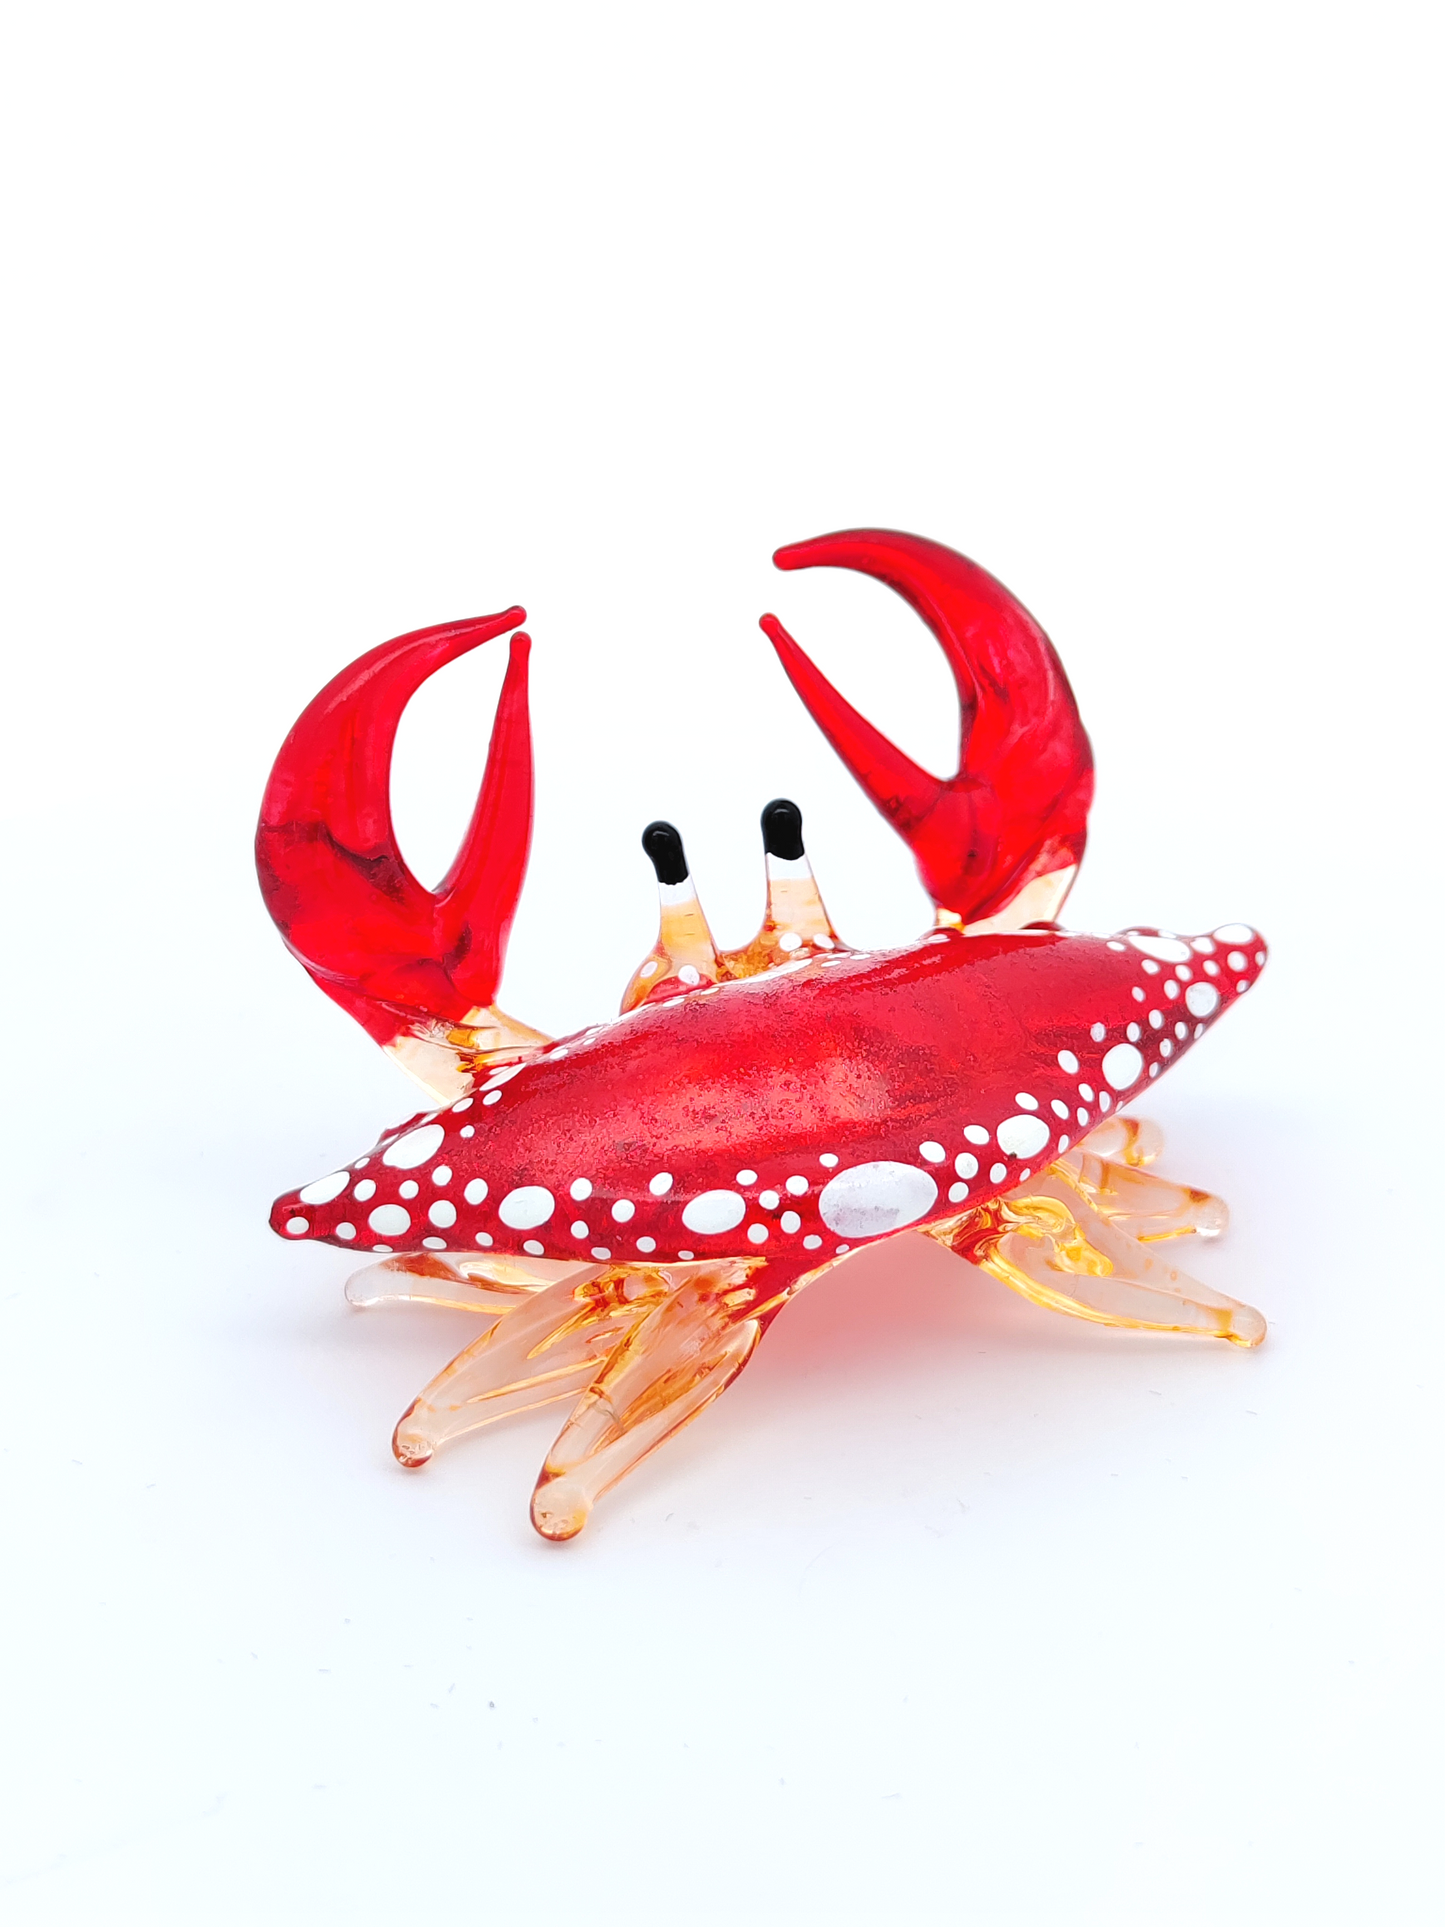 Glass Crab Figurine Red Hand Blown Painted Art Miniature Coastal Style Gift Home Decoration,1.7 x 2.5 x 1.4 inches.